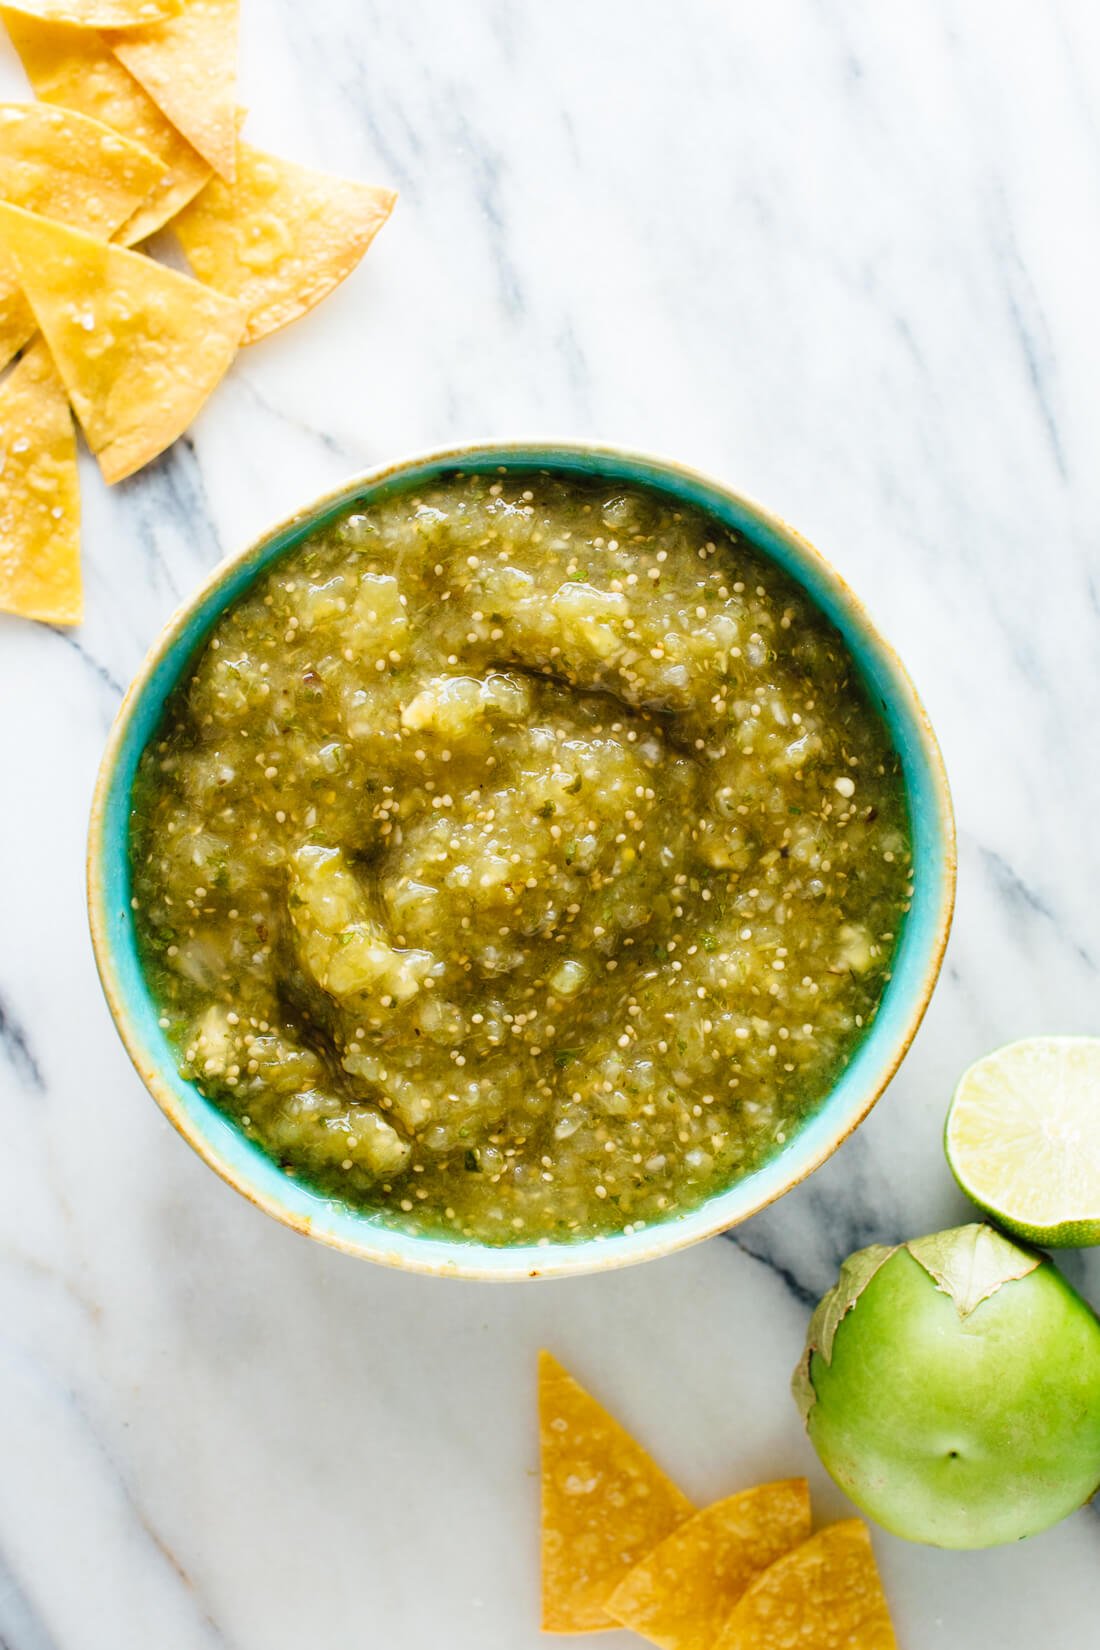 This homemade salsa verde is fresh, simple and delicious! This salsa verde recipe will take your Mexican meal to the next level. cookieandkate.com